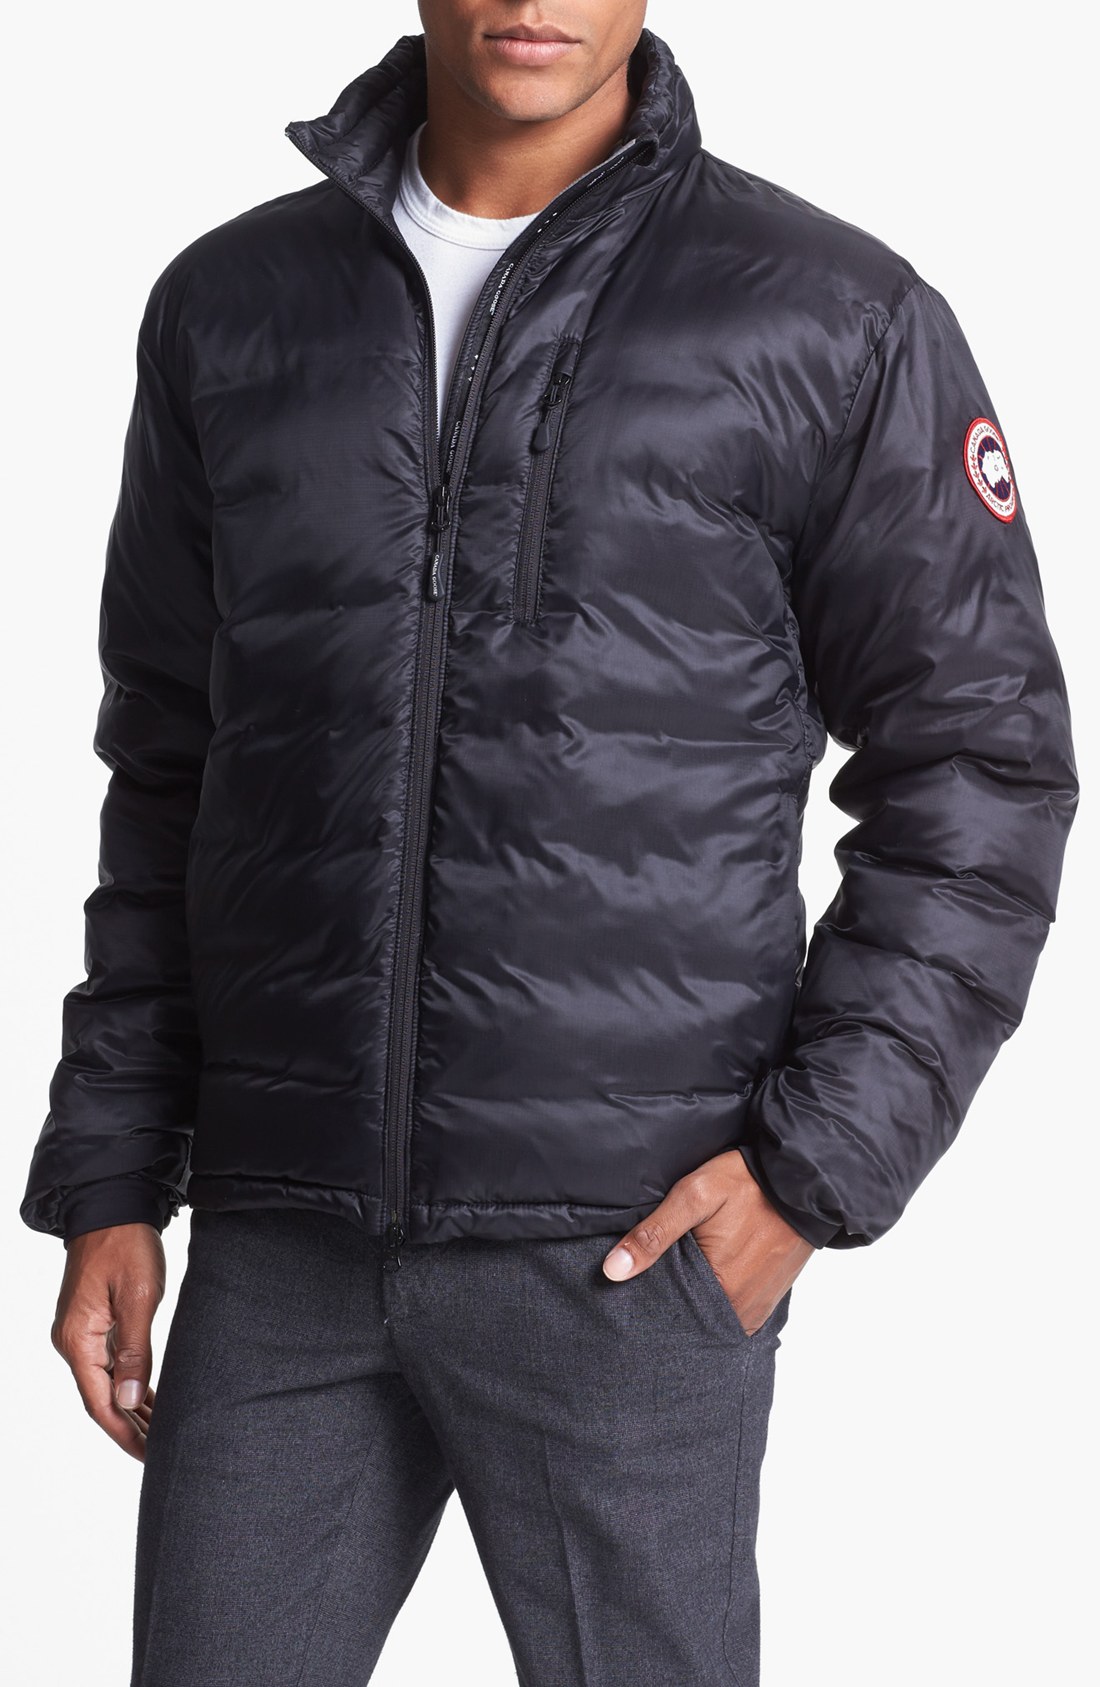 Canada Goose chateau parka outlet cheap - Perfect Online Shop To Buy Canada Goose Women Camp Coat High ...